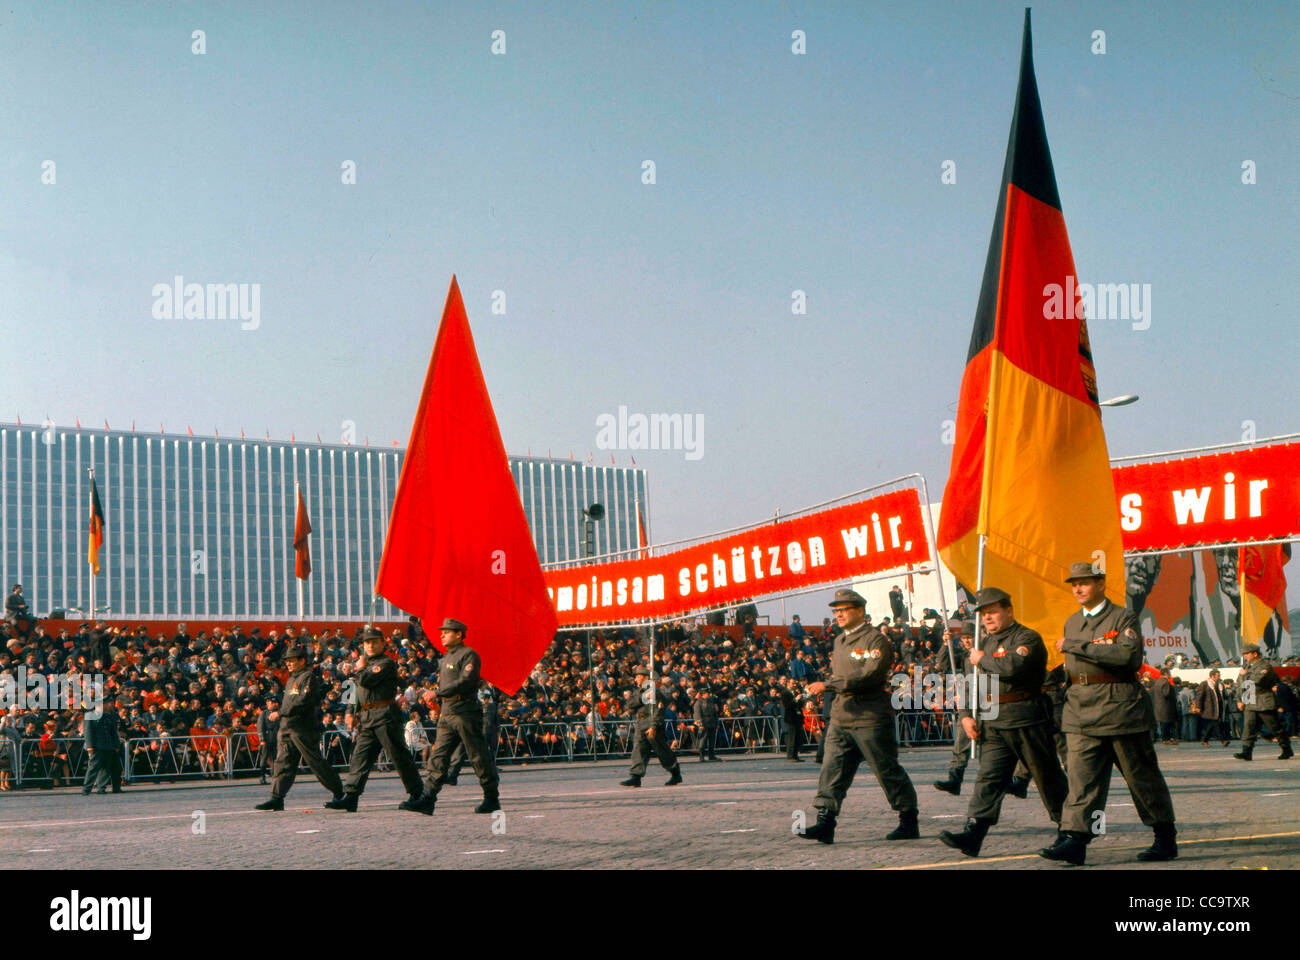 Parade of the paramilitary workers organization “Combat Groups of the Working Class” the GDR 1971 in East Berlin. Stock Photo